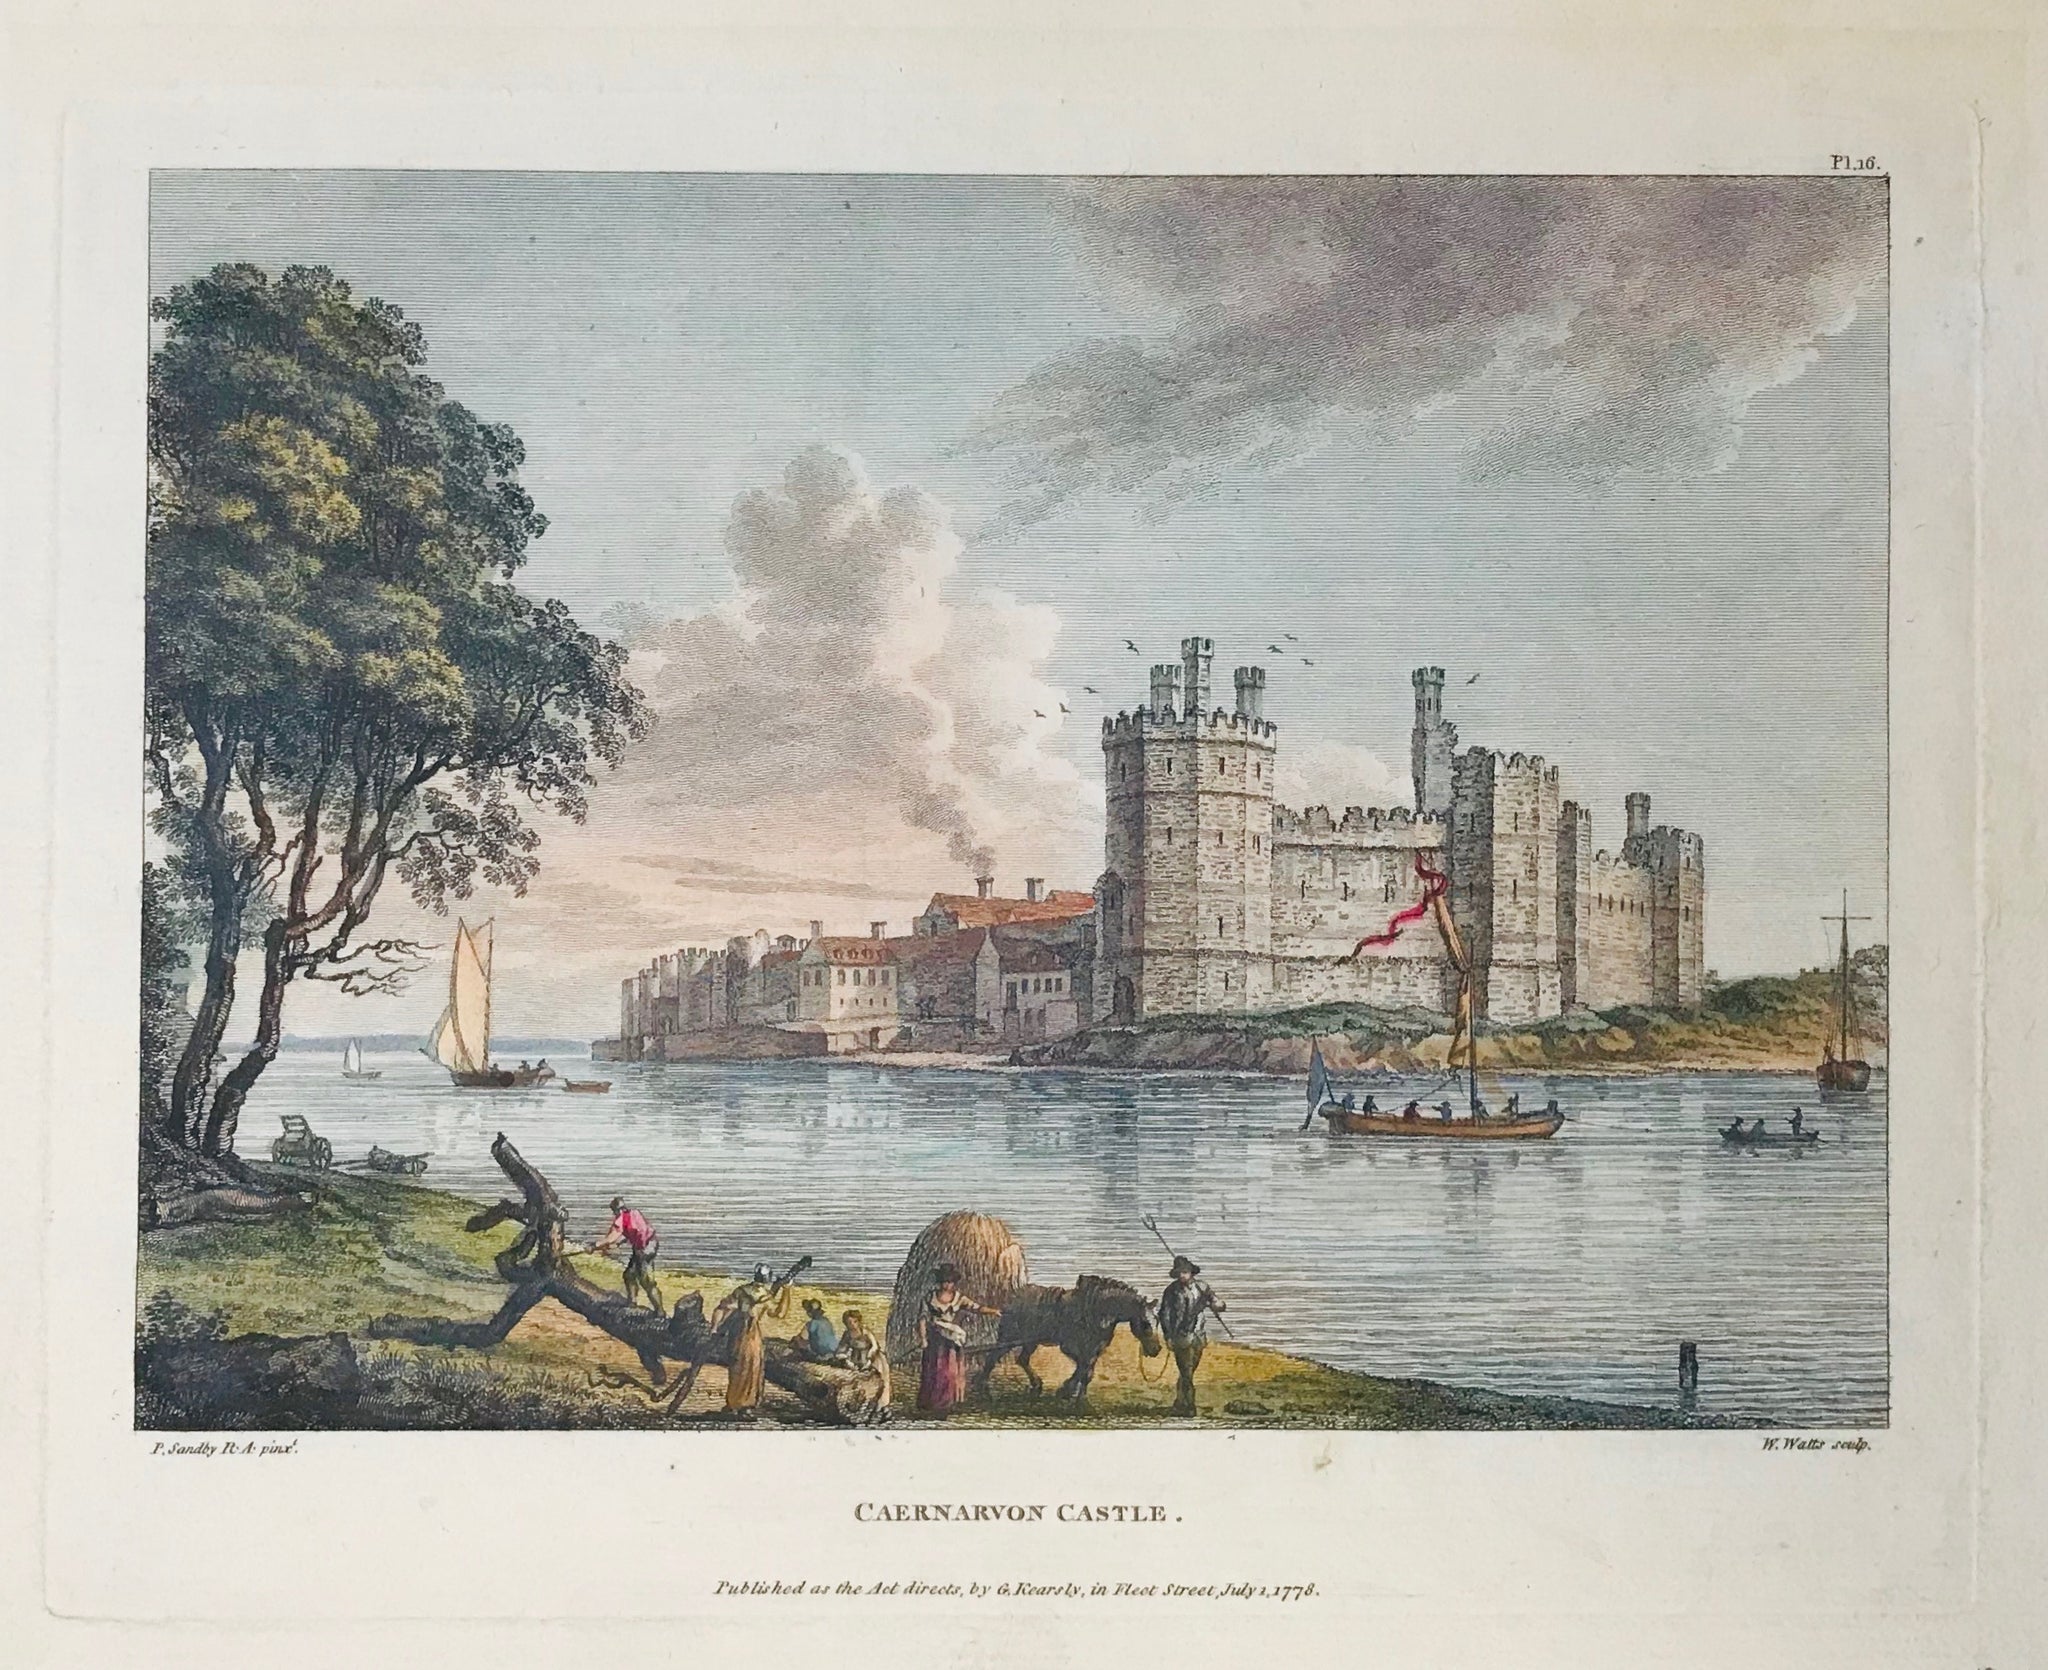 Wales, Caernarvon Castle  By W. Watts after P. Sandy, dated 1778. Creasing in lower part of image. Small repaired tear on right margin edge.